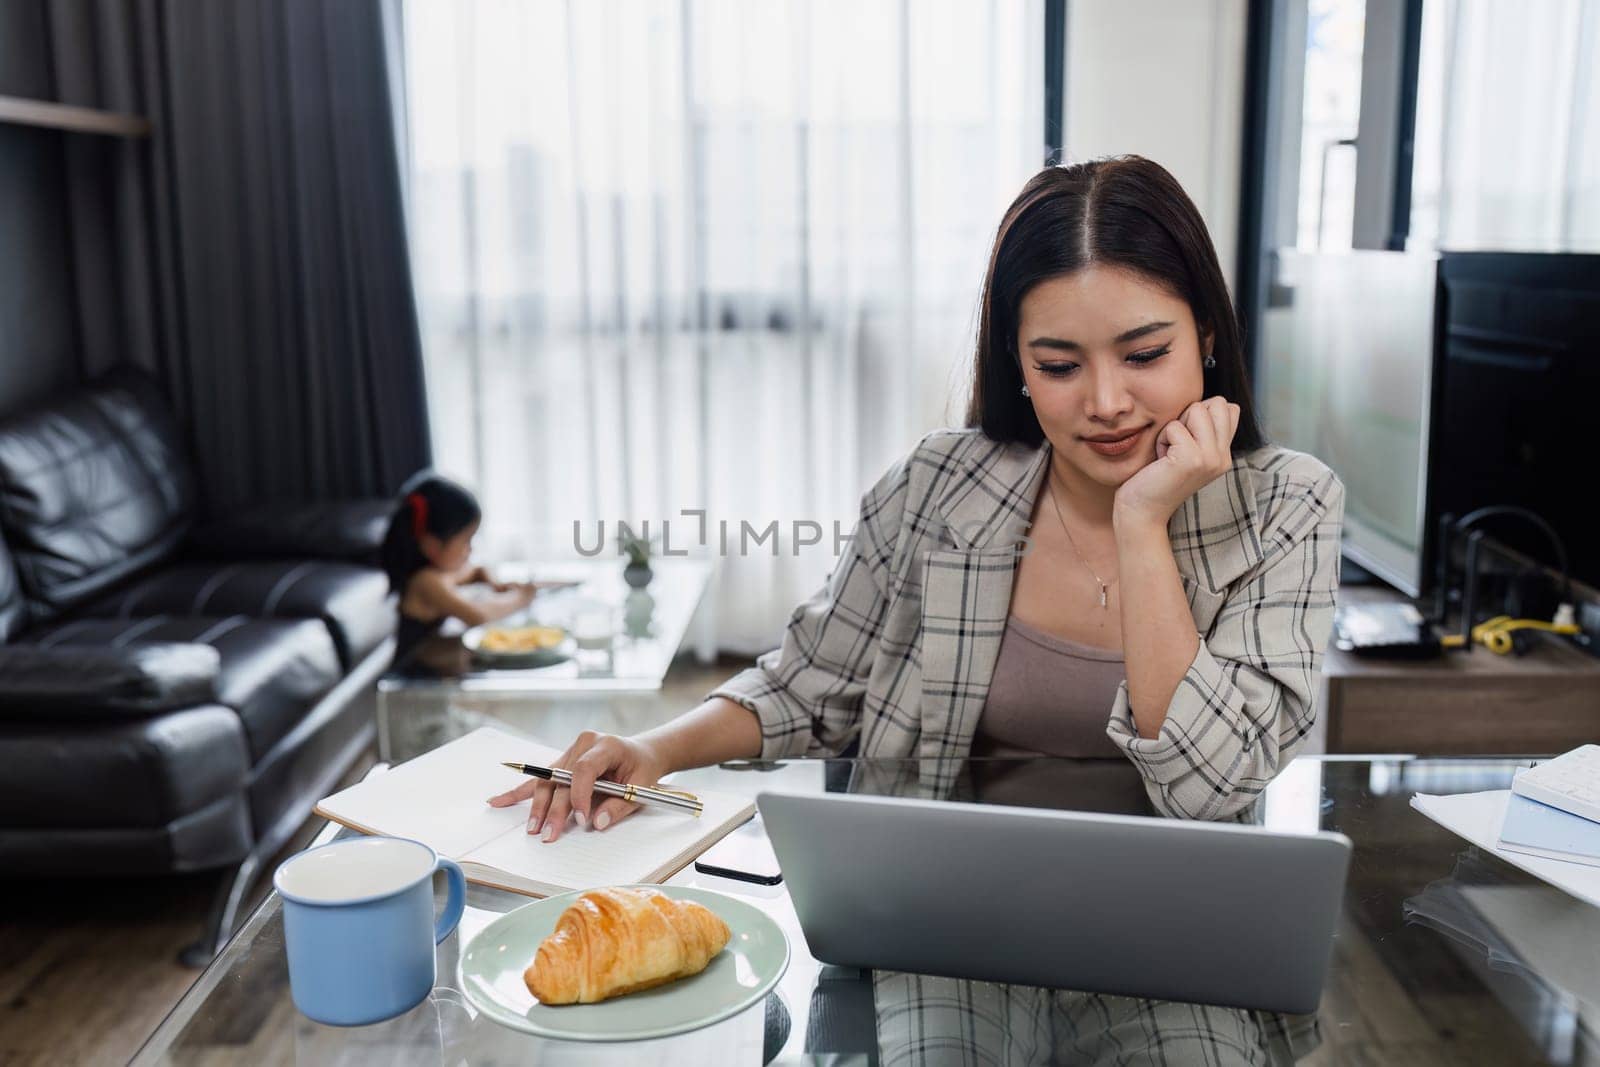 Business woman working from home and taking care of child while working, child doing activities in the background.